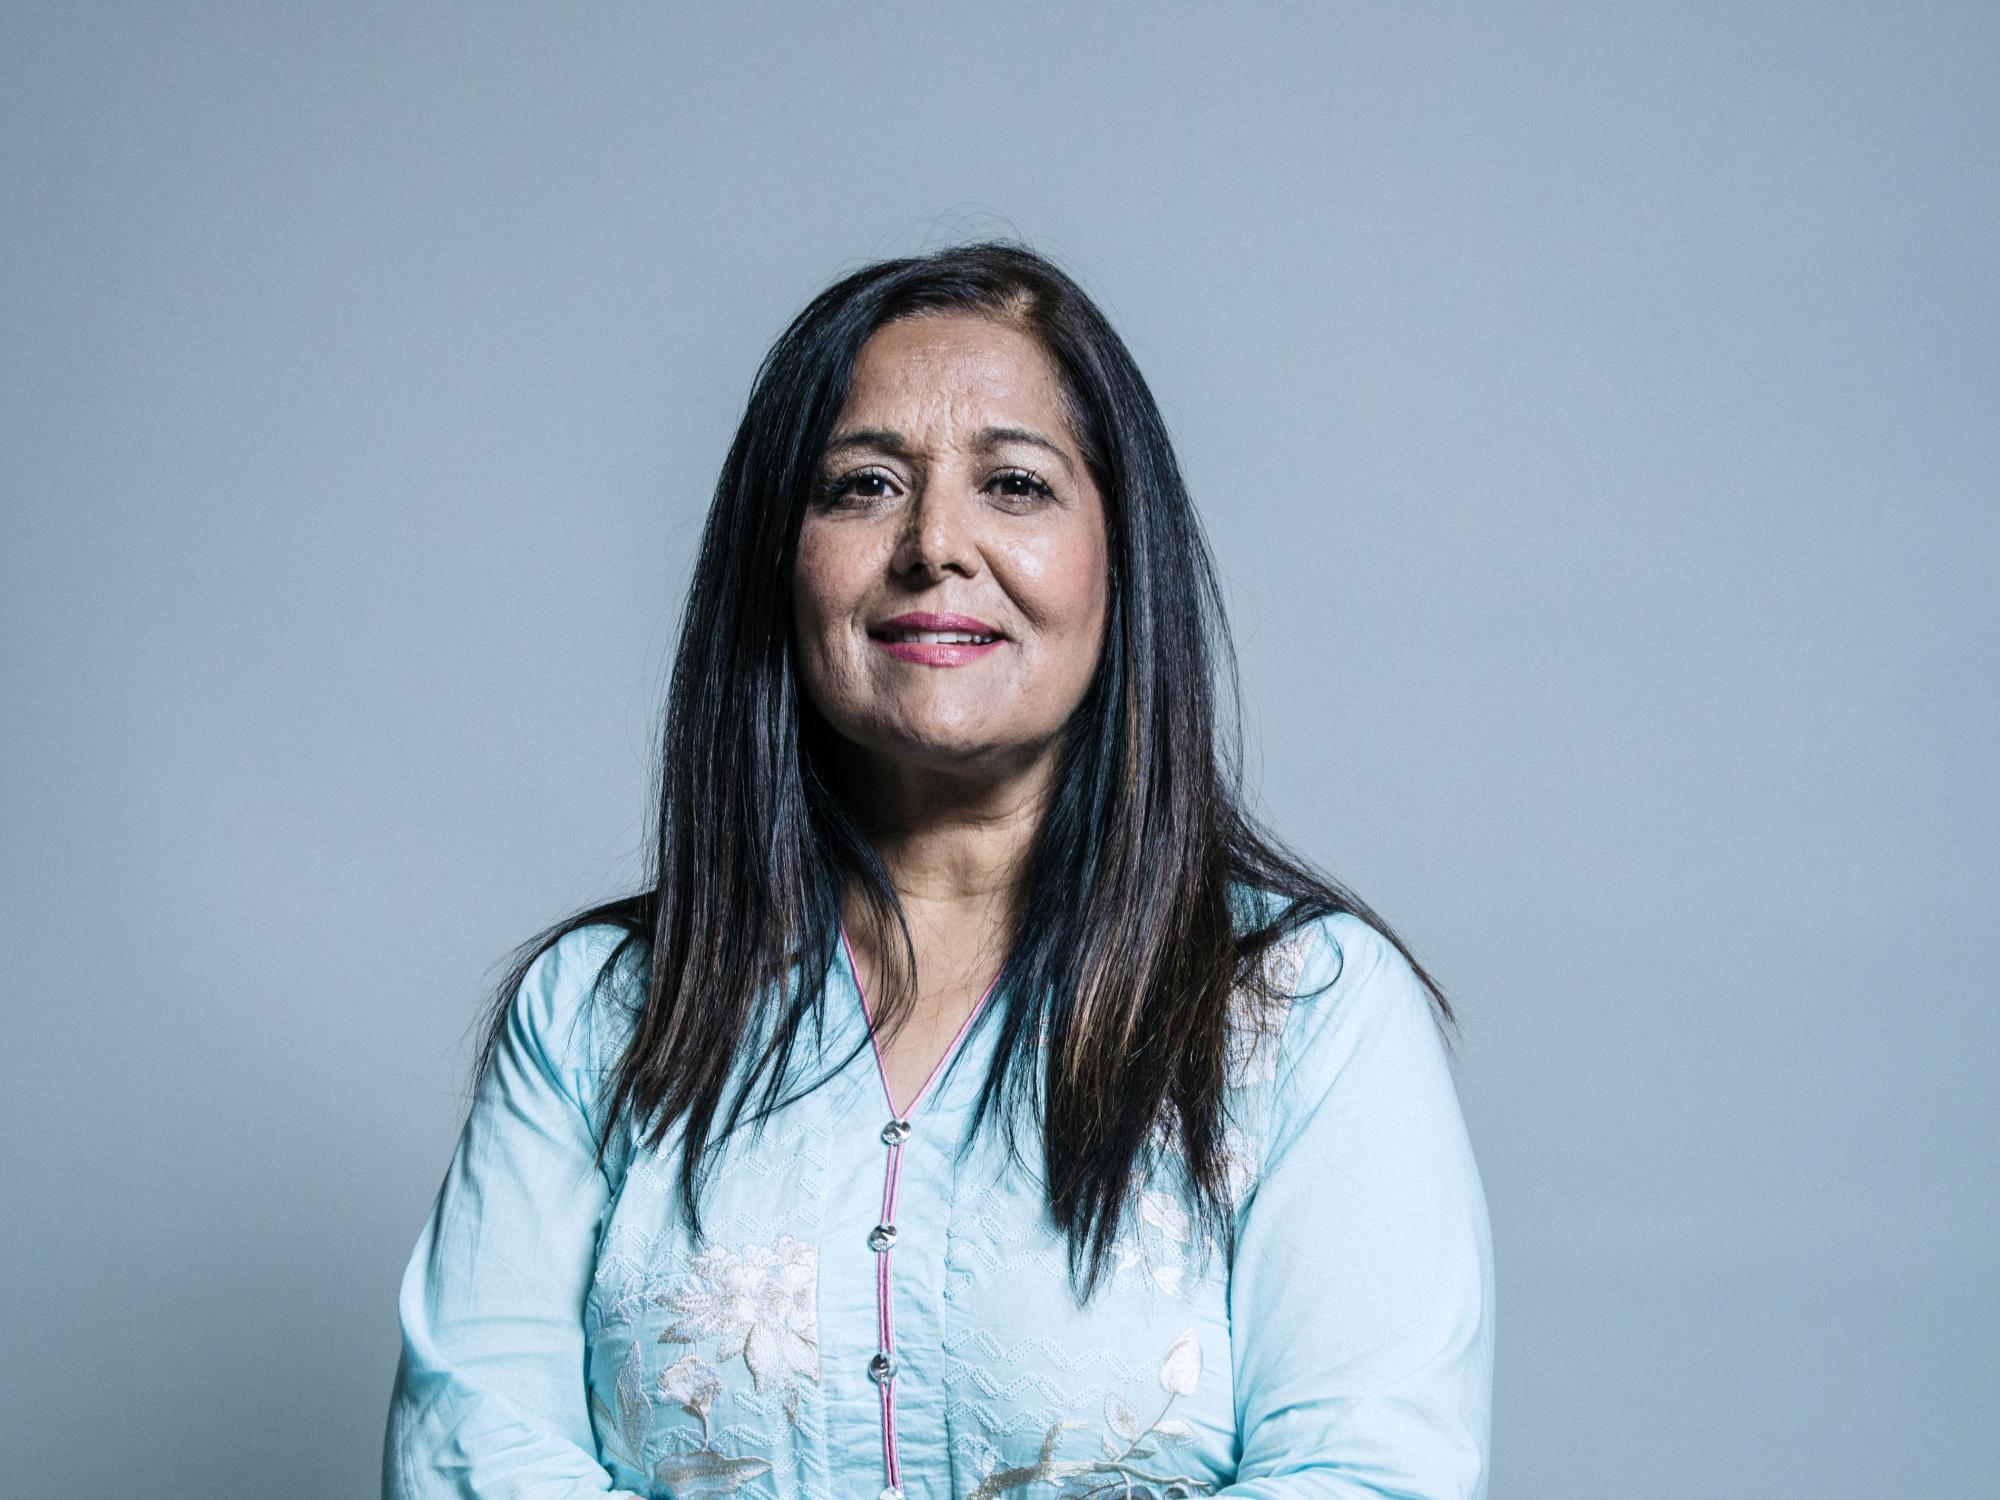 Yasmin Qureshi has been the Member of Parliament for Bolton South East since the 2010 General Election.